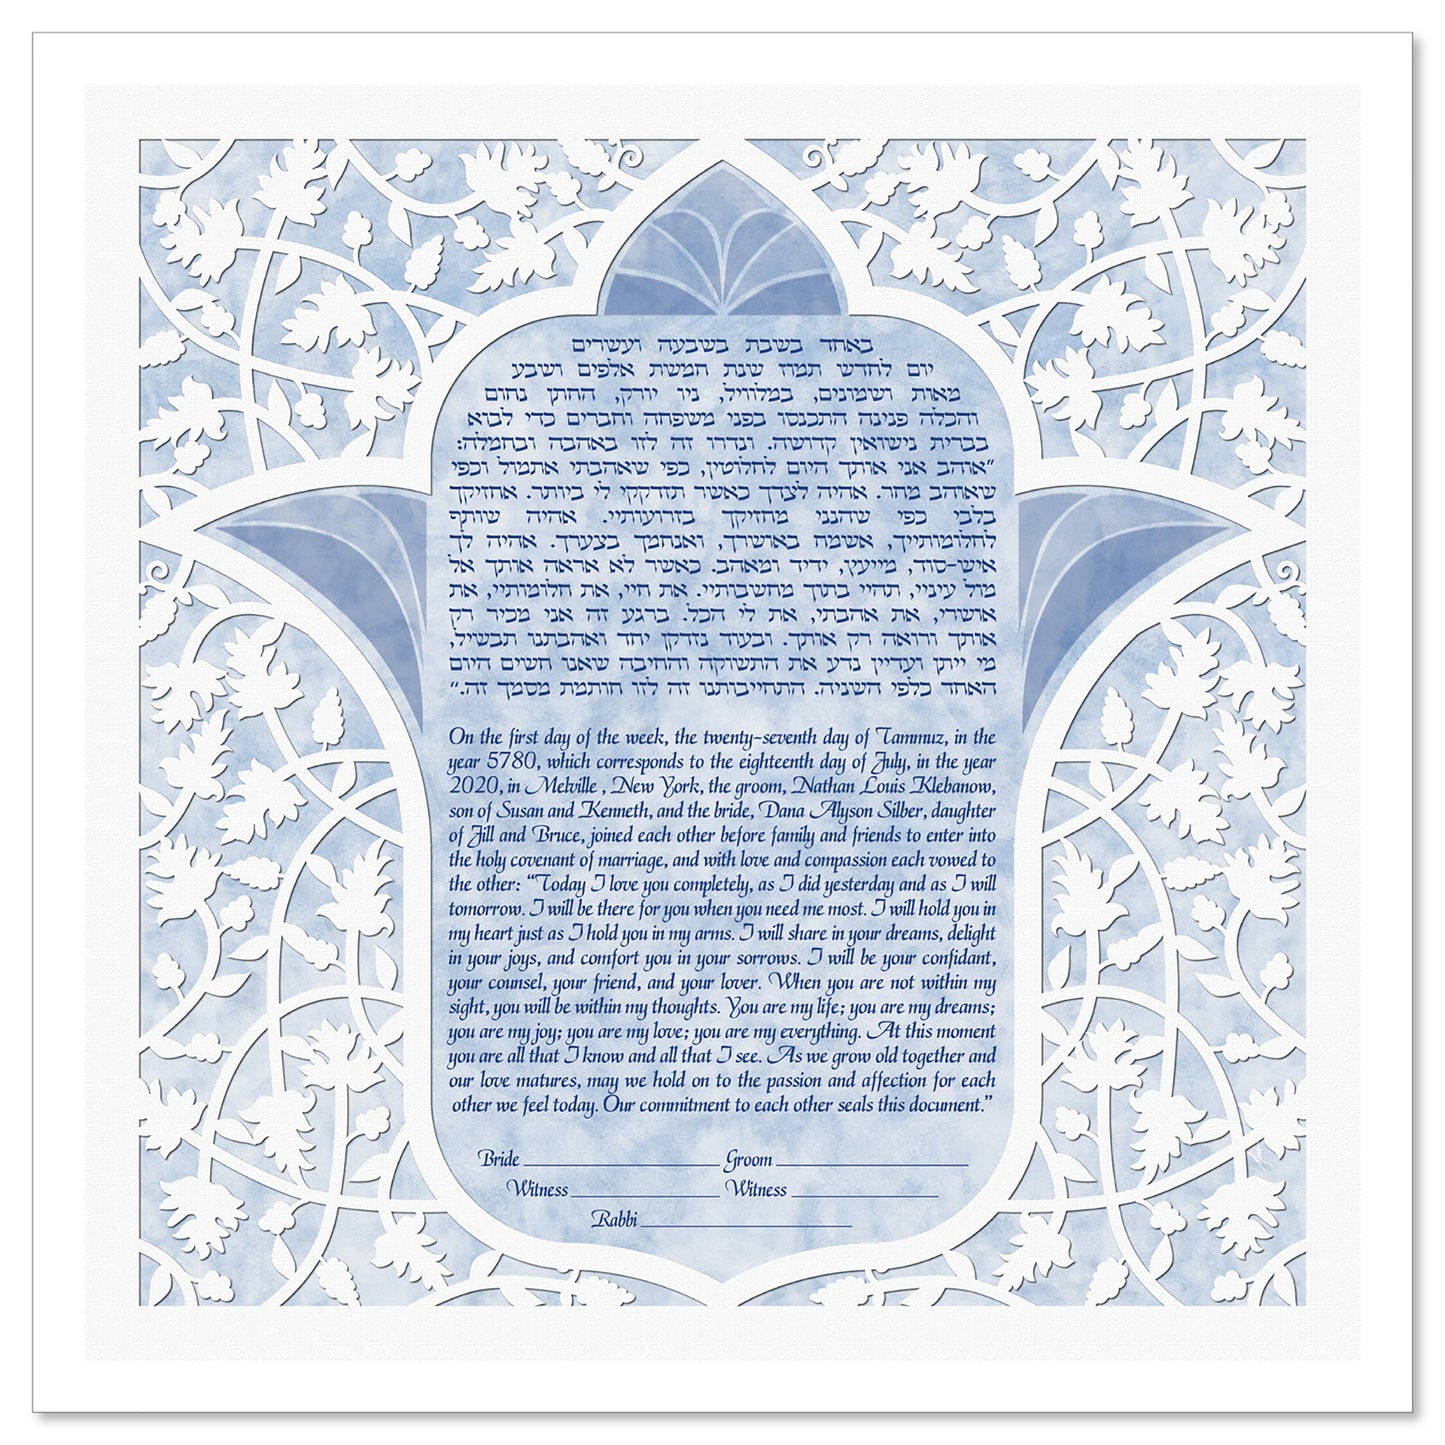 Lotus Hamsa 2 Blue ketubah by Micah Parker features the ketubah text in the center of a hamsa shape that resembles a lotus flower with a lacy white leaf pattern over a blue background.